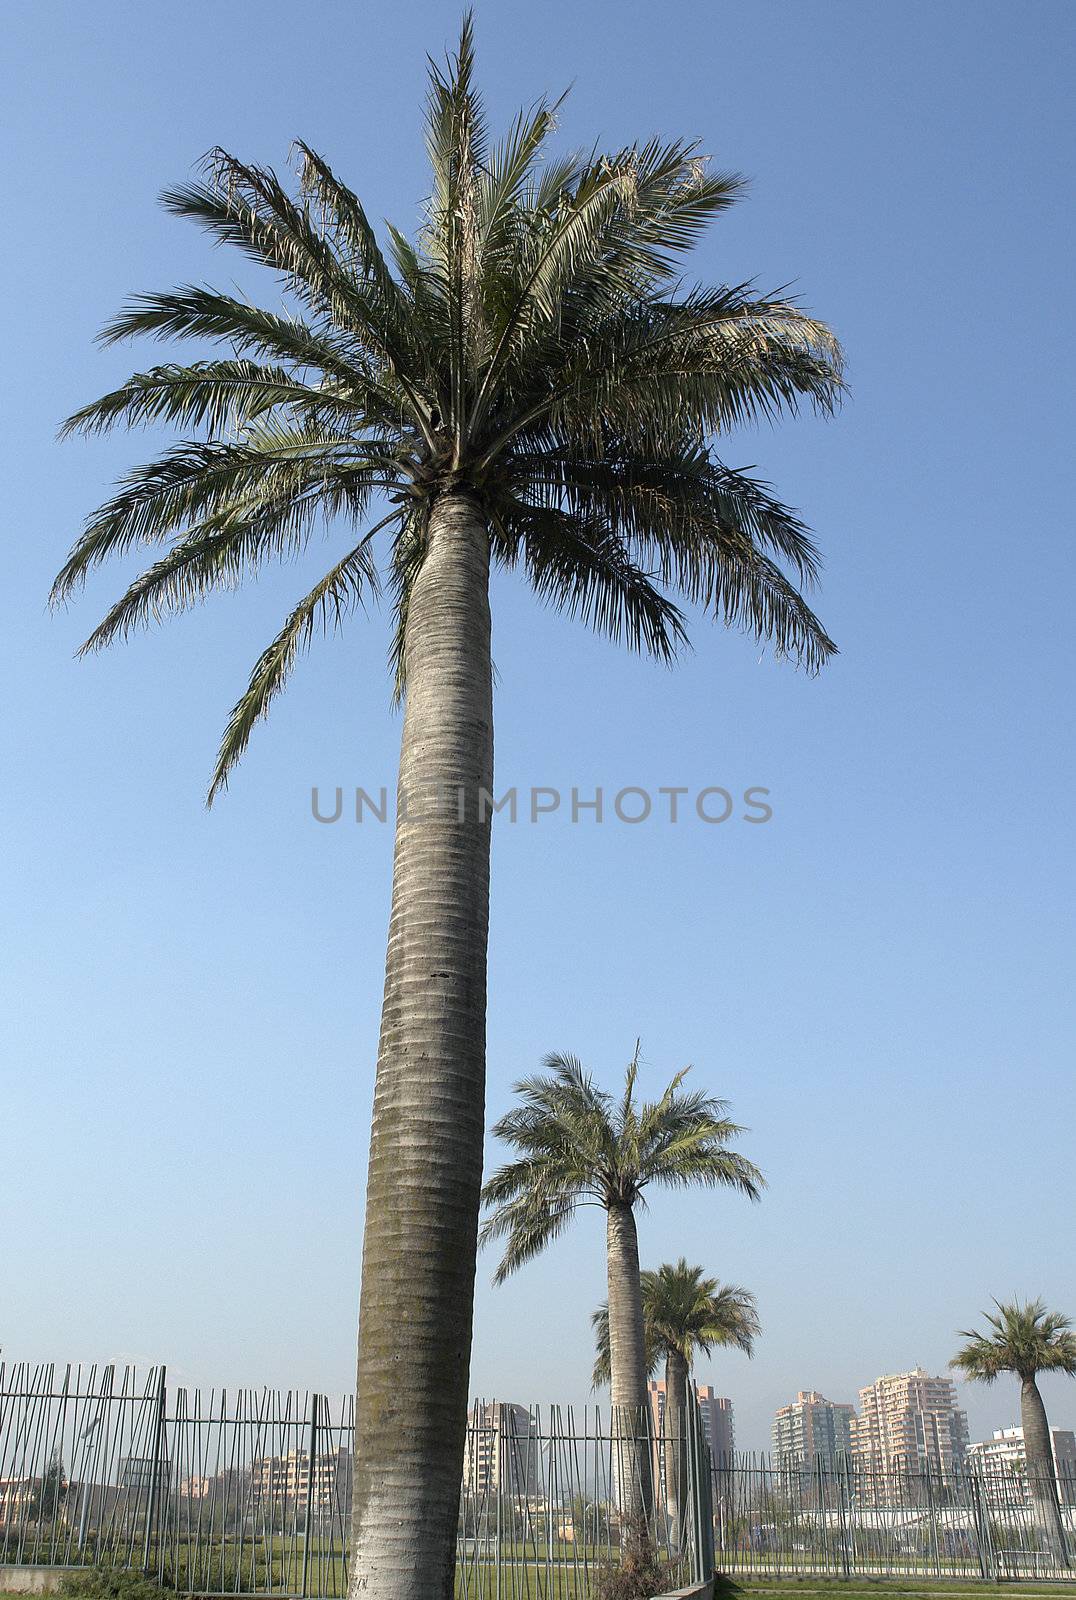 Group of palm trees in the city of Santiago, chili.